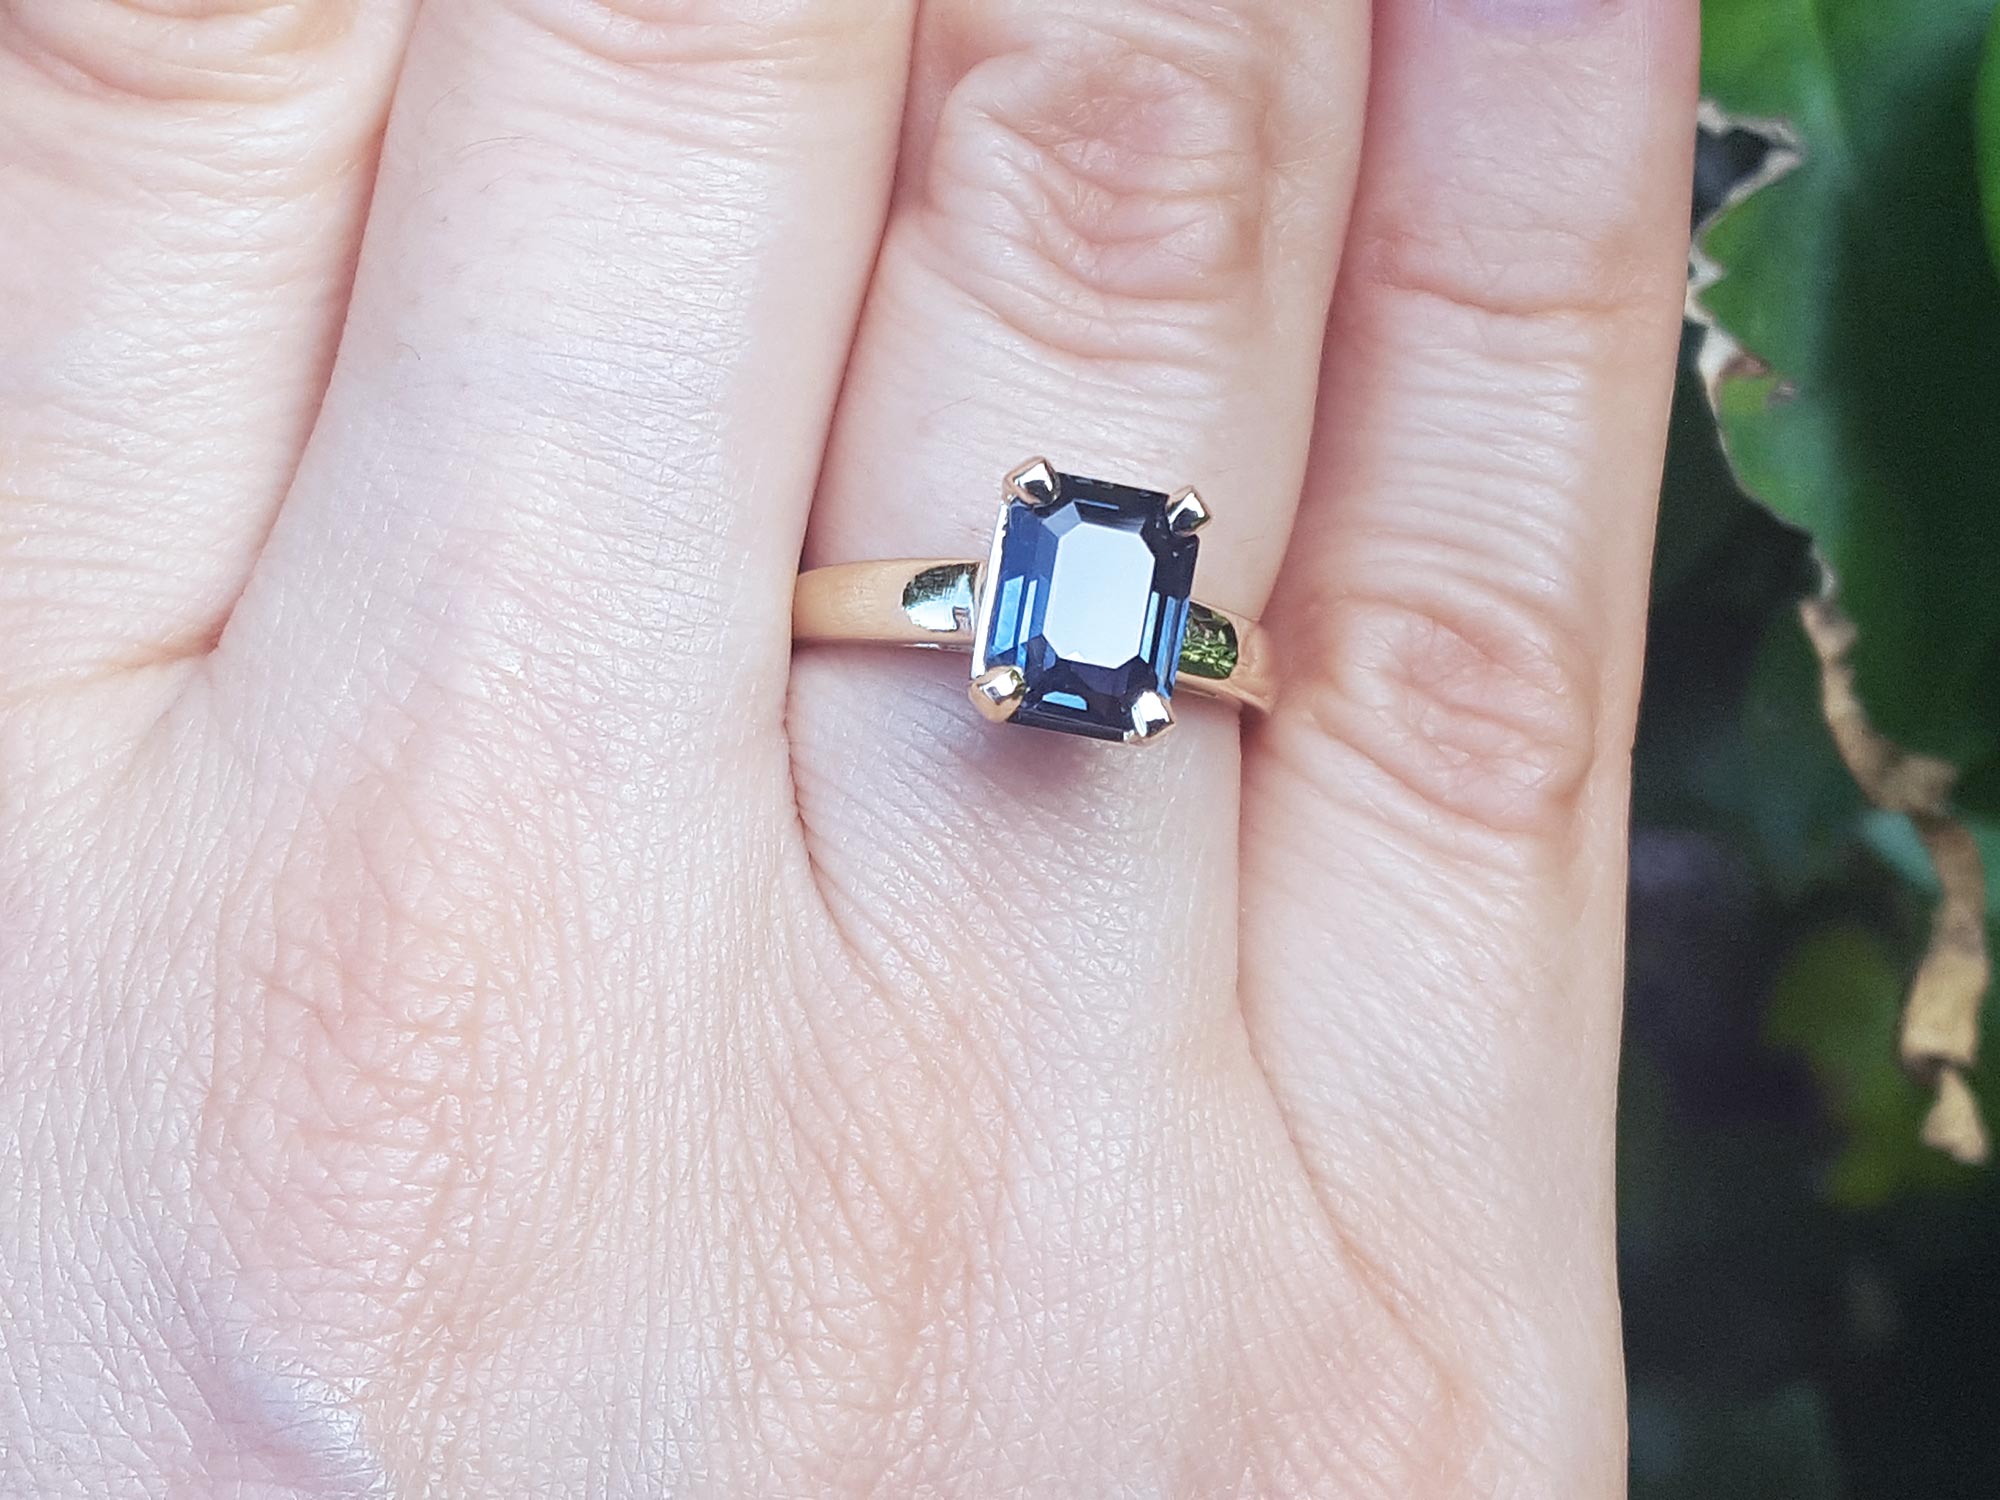 Authentic sapphire ring